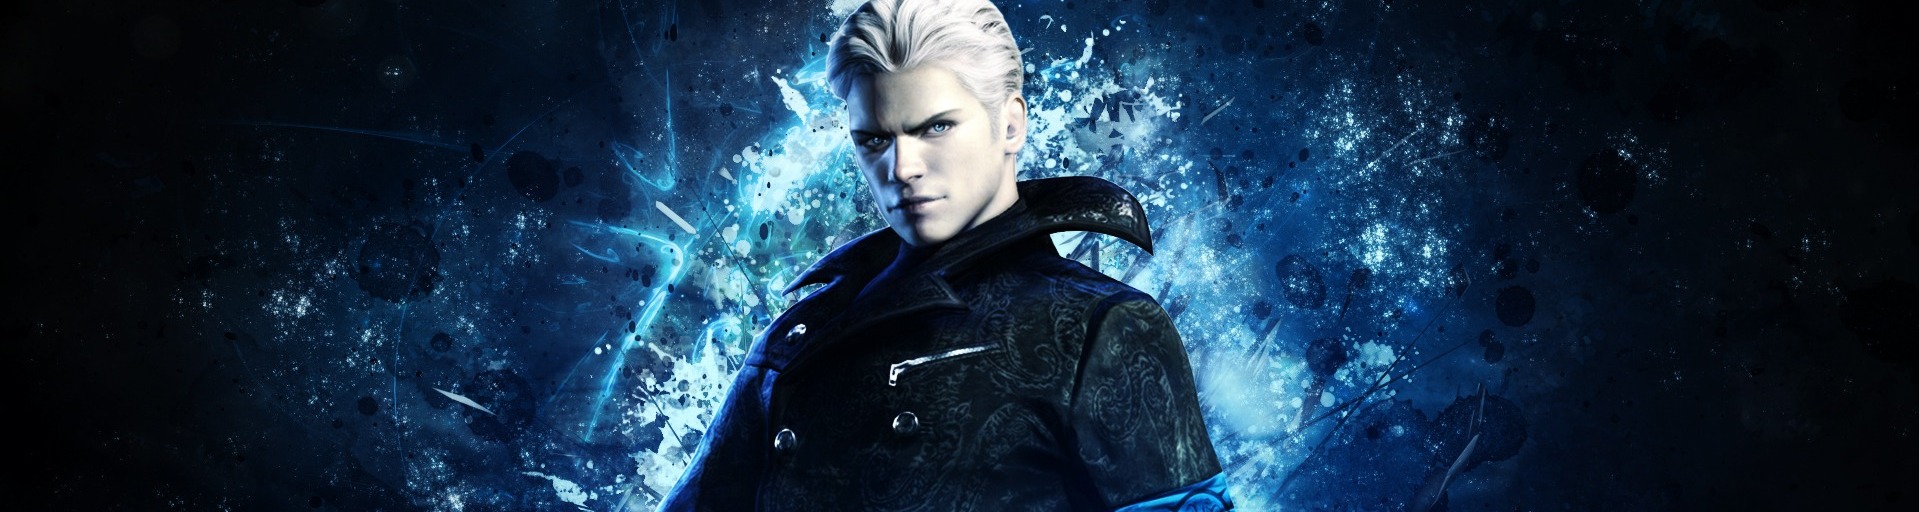 Devil May Cry: Vergil's Downfall' video